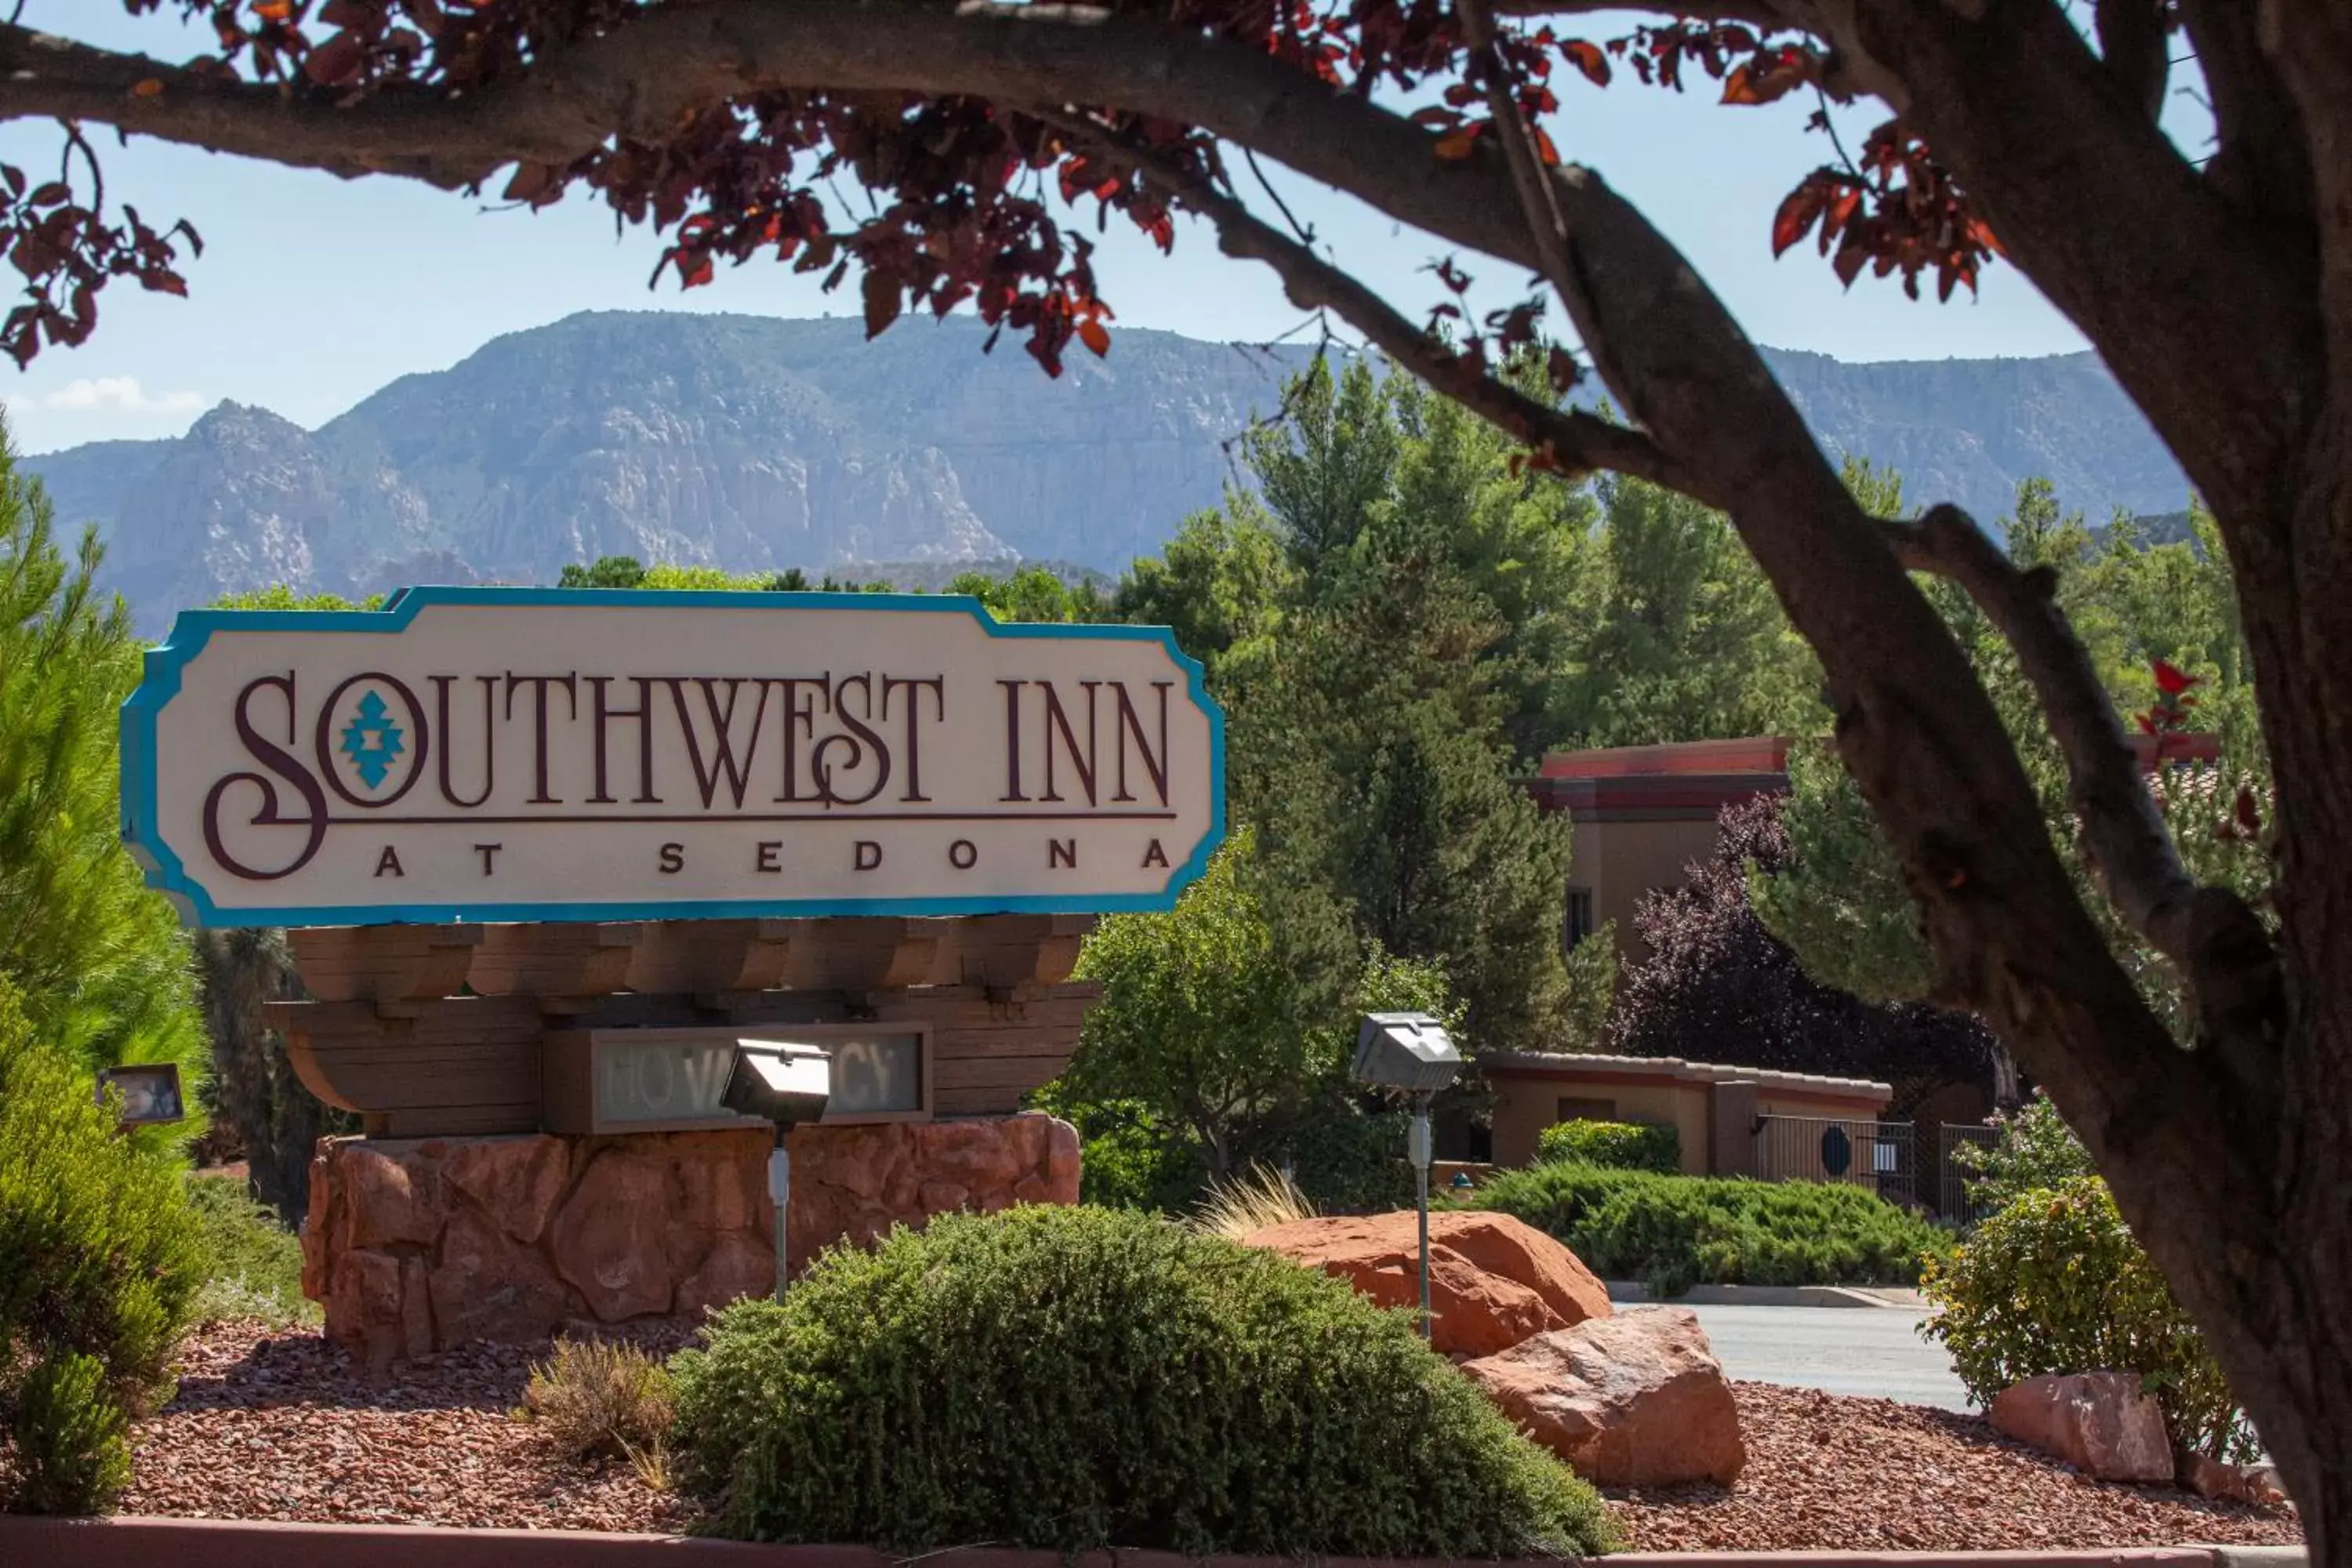 Property logo or sign, Property Building in Southwest Inn at Sedona